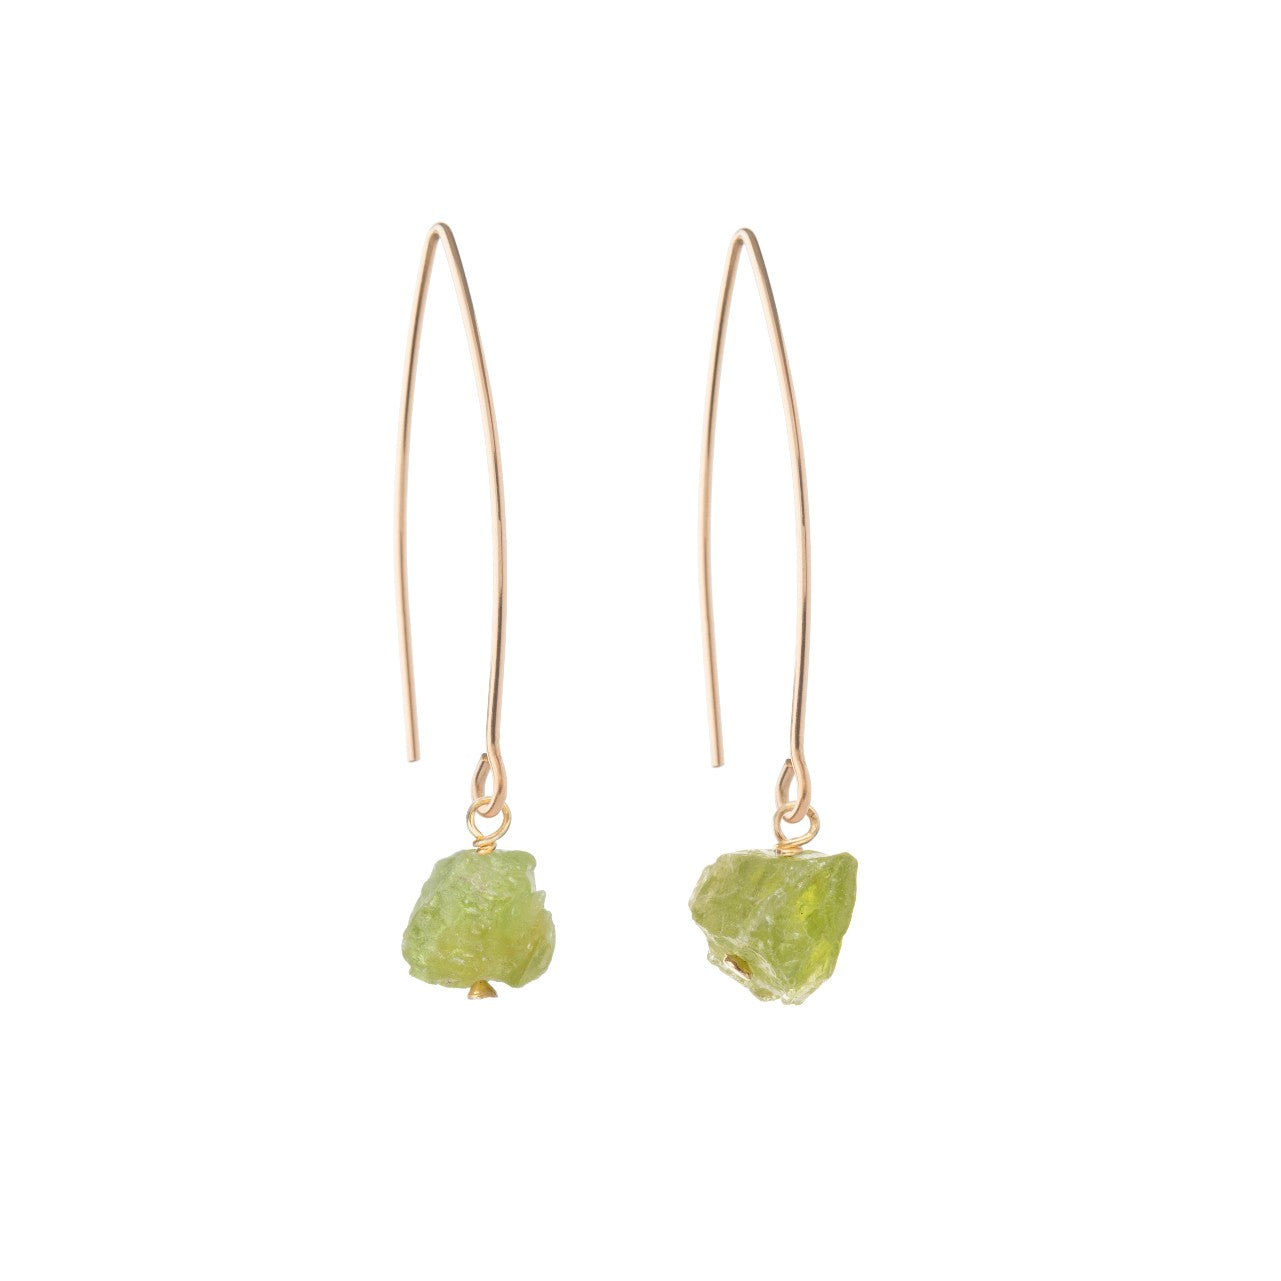 Load image into Gallery viewer, Peridot Threaded Dropper Earrings | Wellbeing (Gold)
